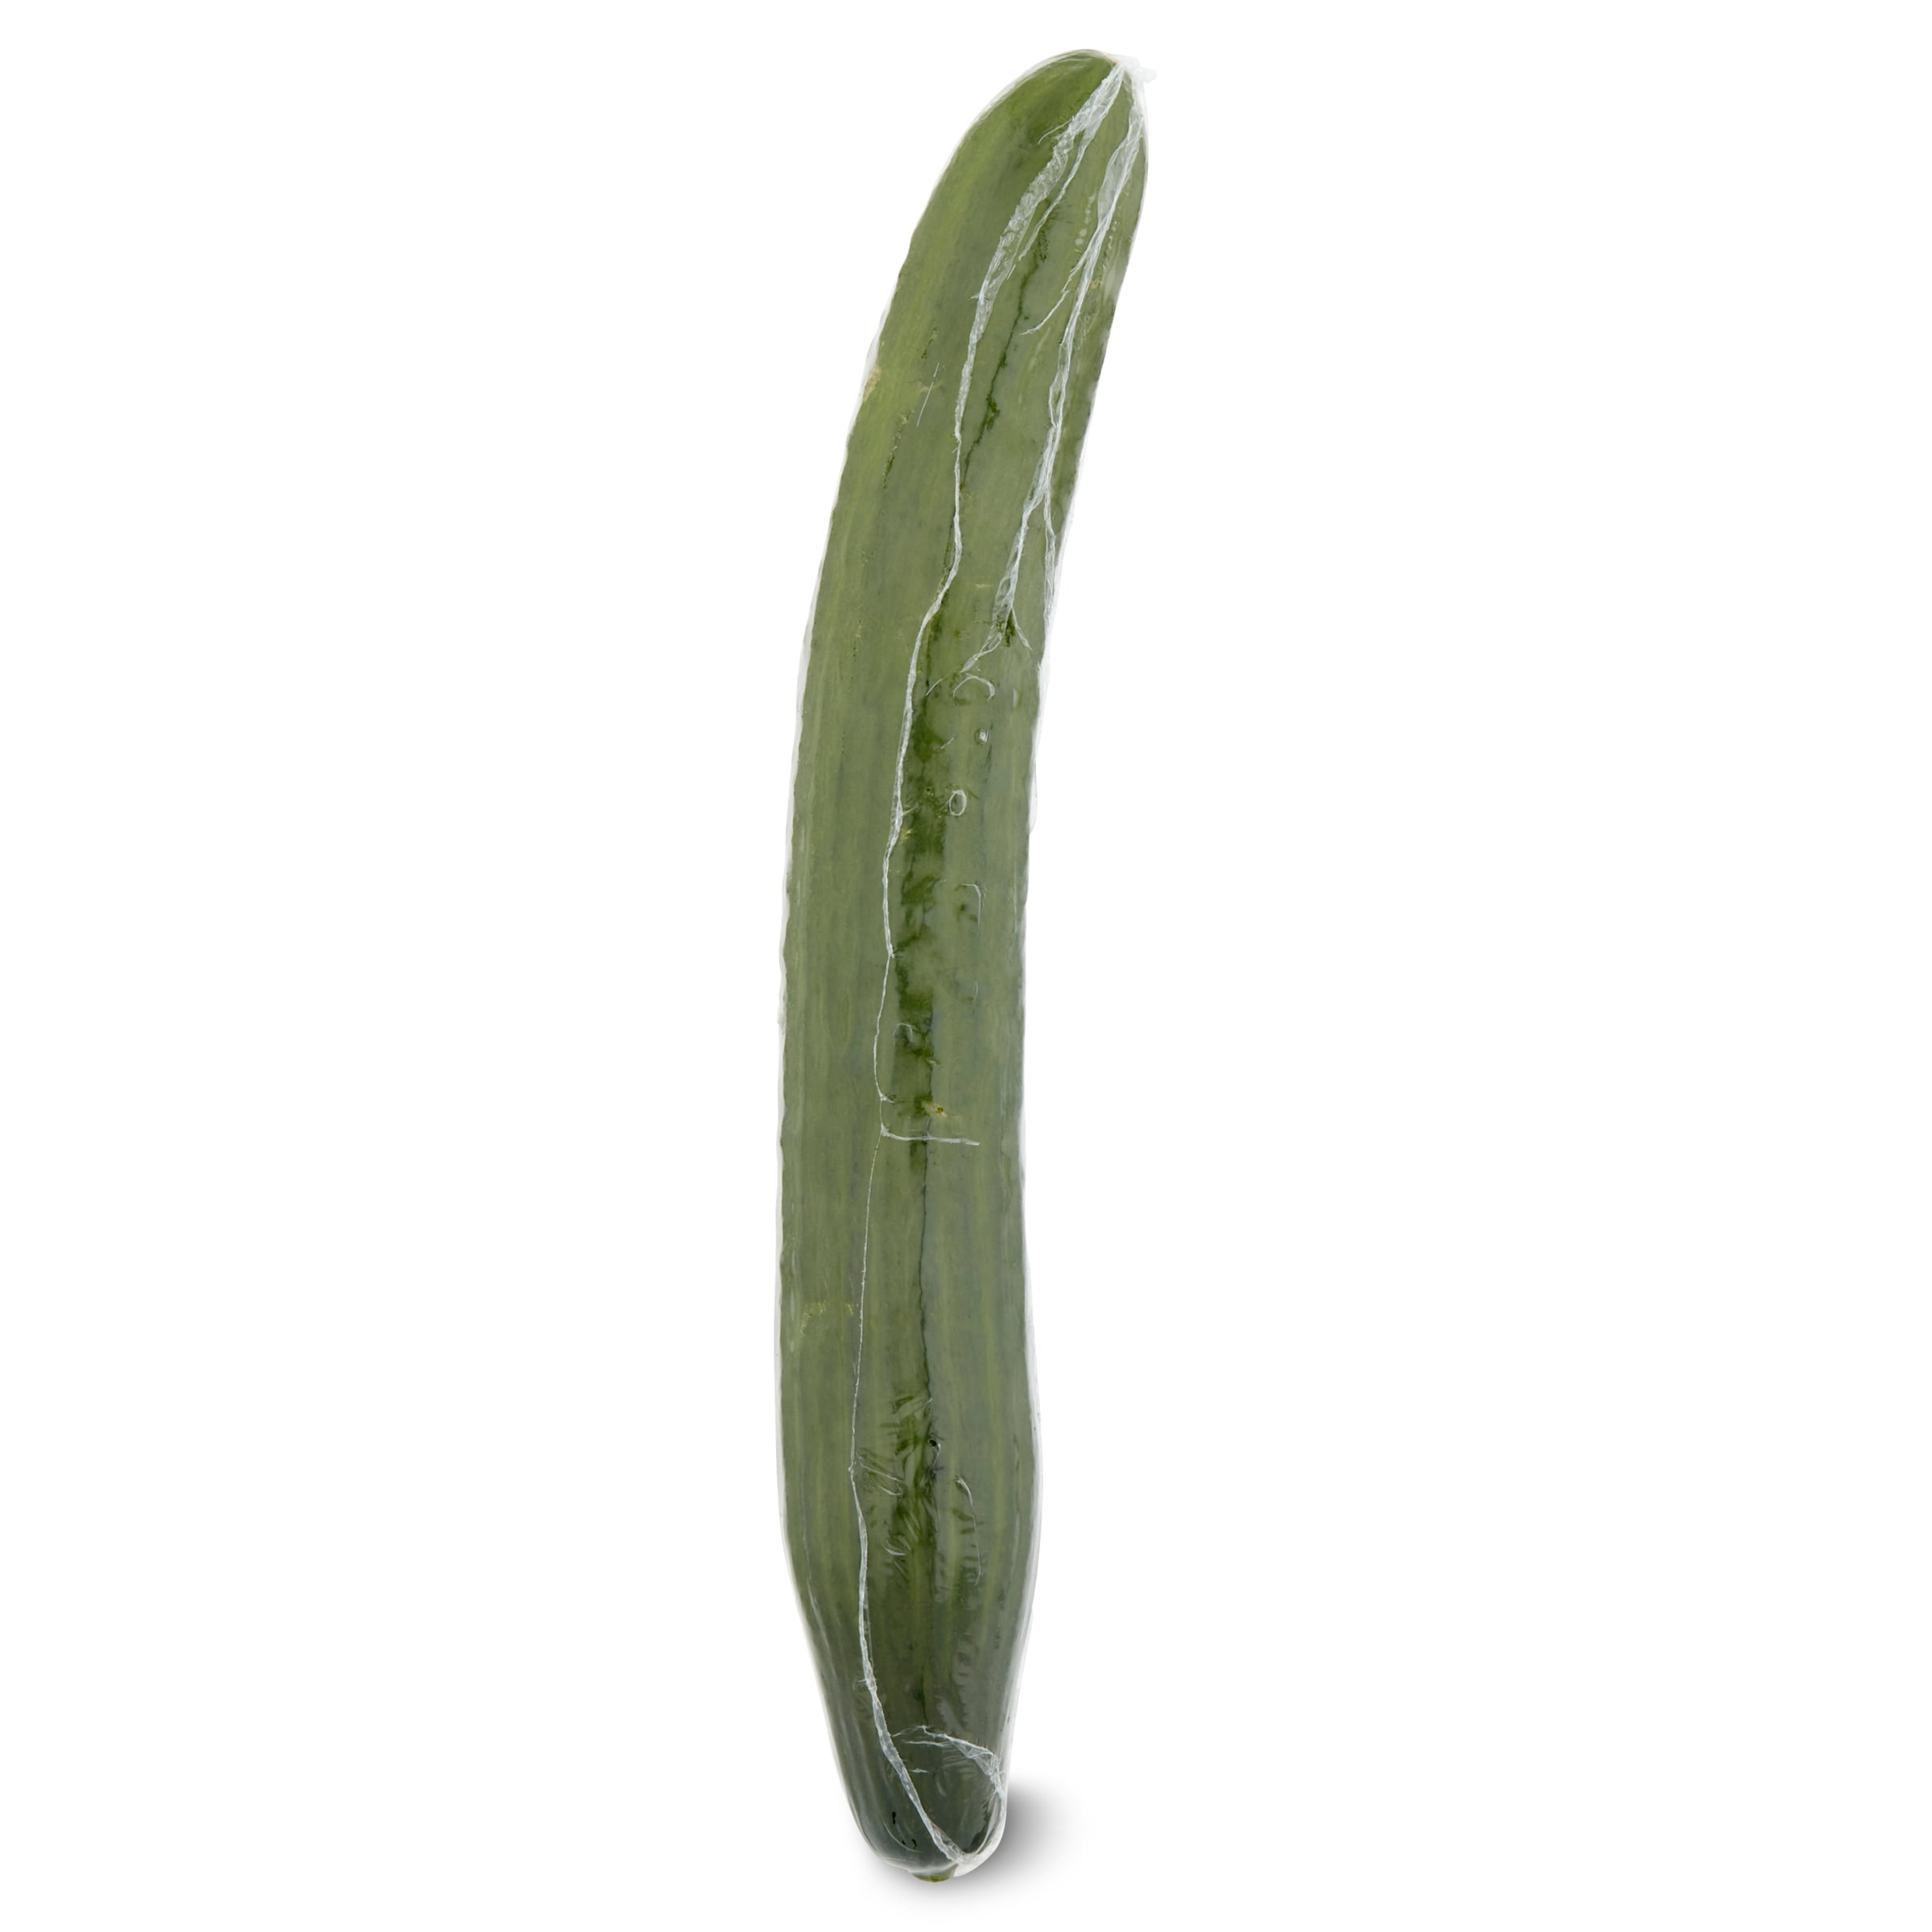 How is English Cucumber Different From Other Cucumbers? 